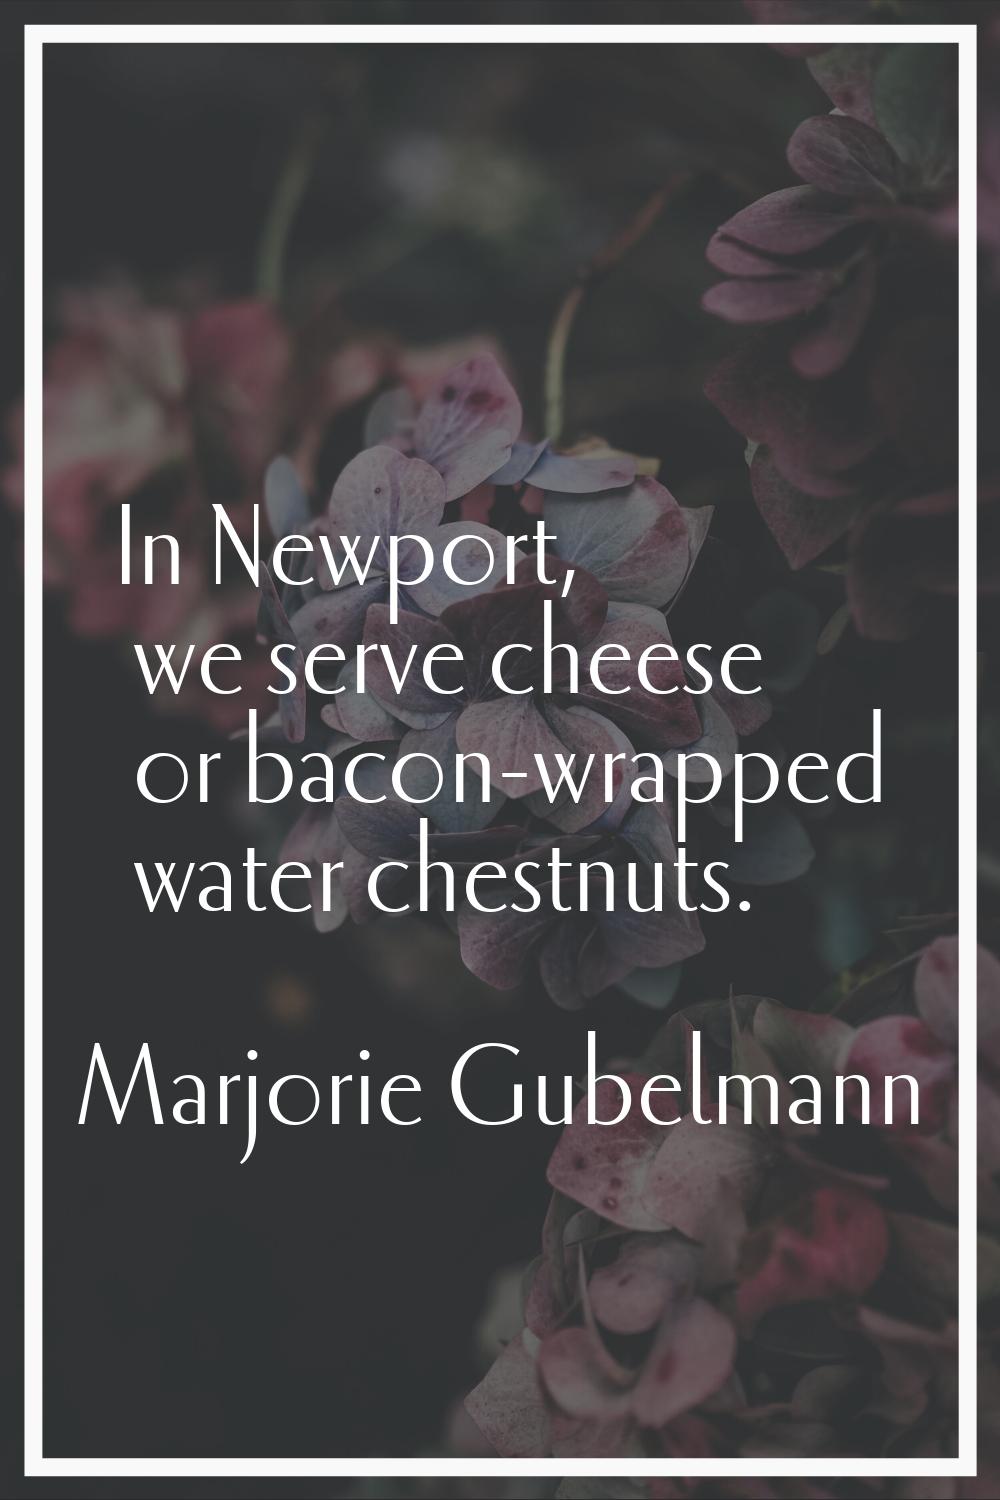 In Newport, we serve cheese or bacon-wrapped water chestnuts.